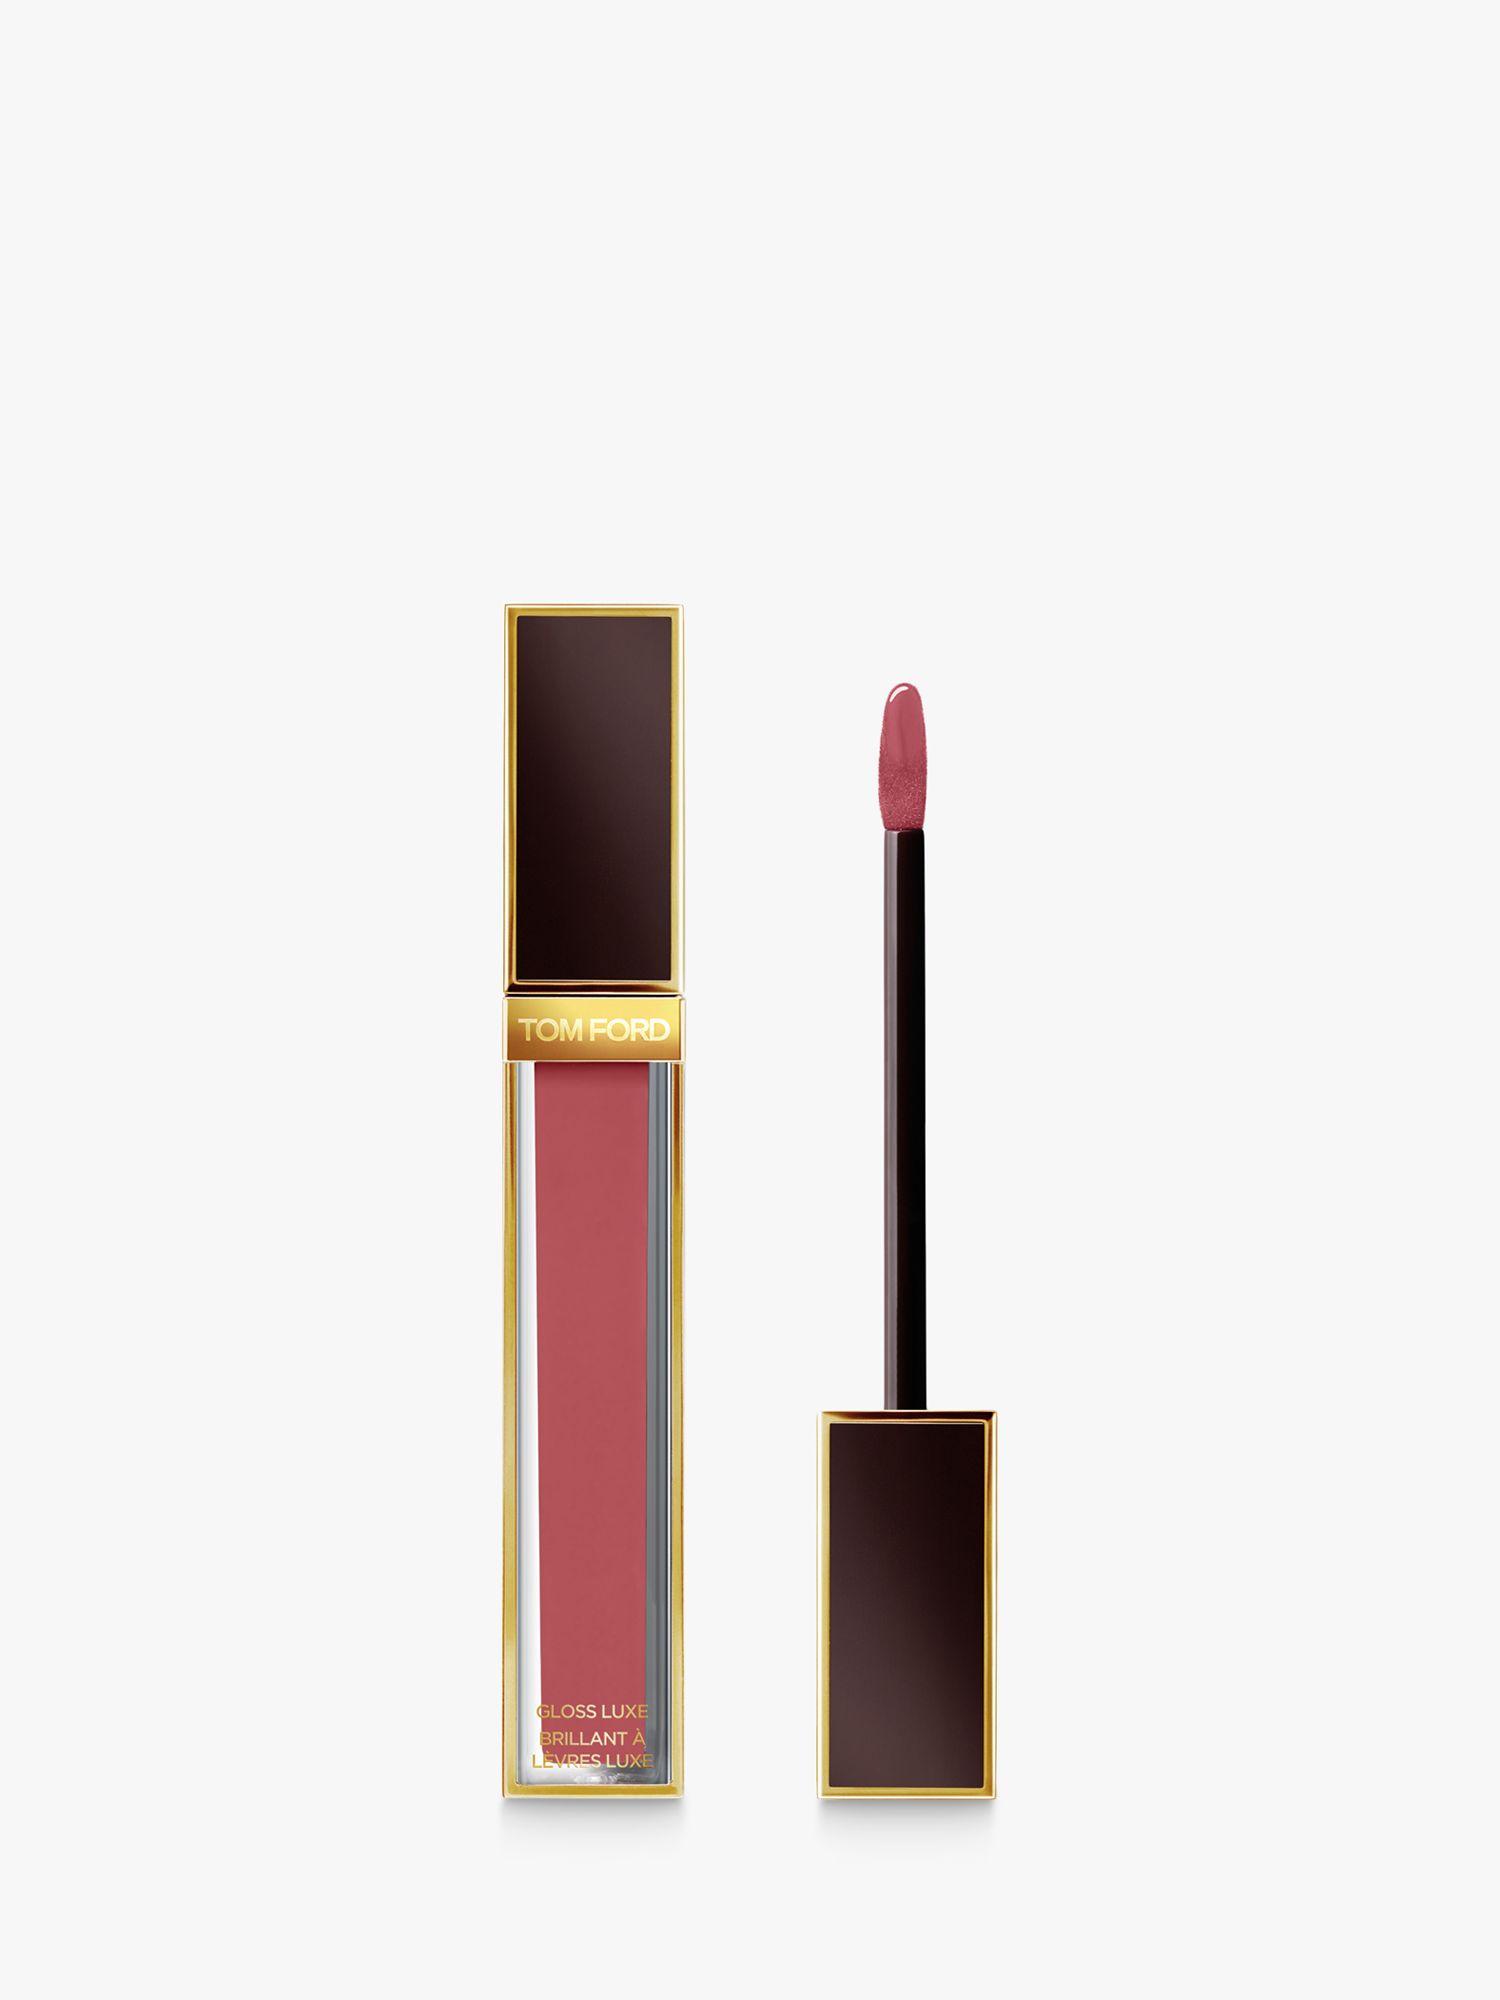 TOM FORD Gloss Luxe, 22 Sunrise Pink 1